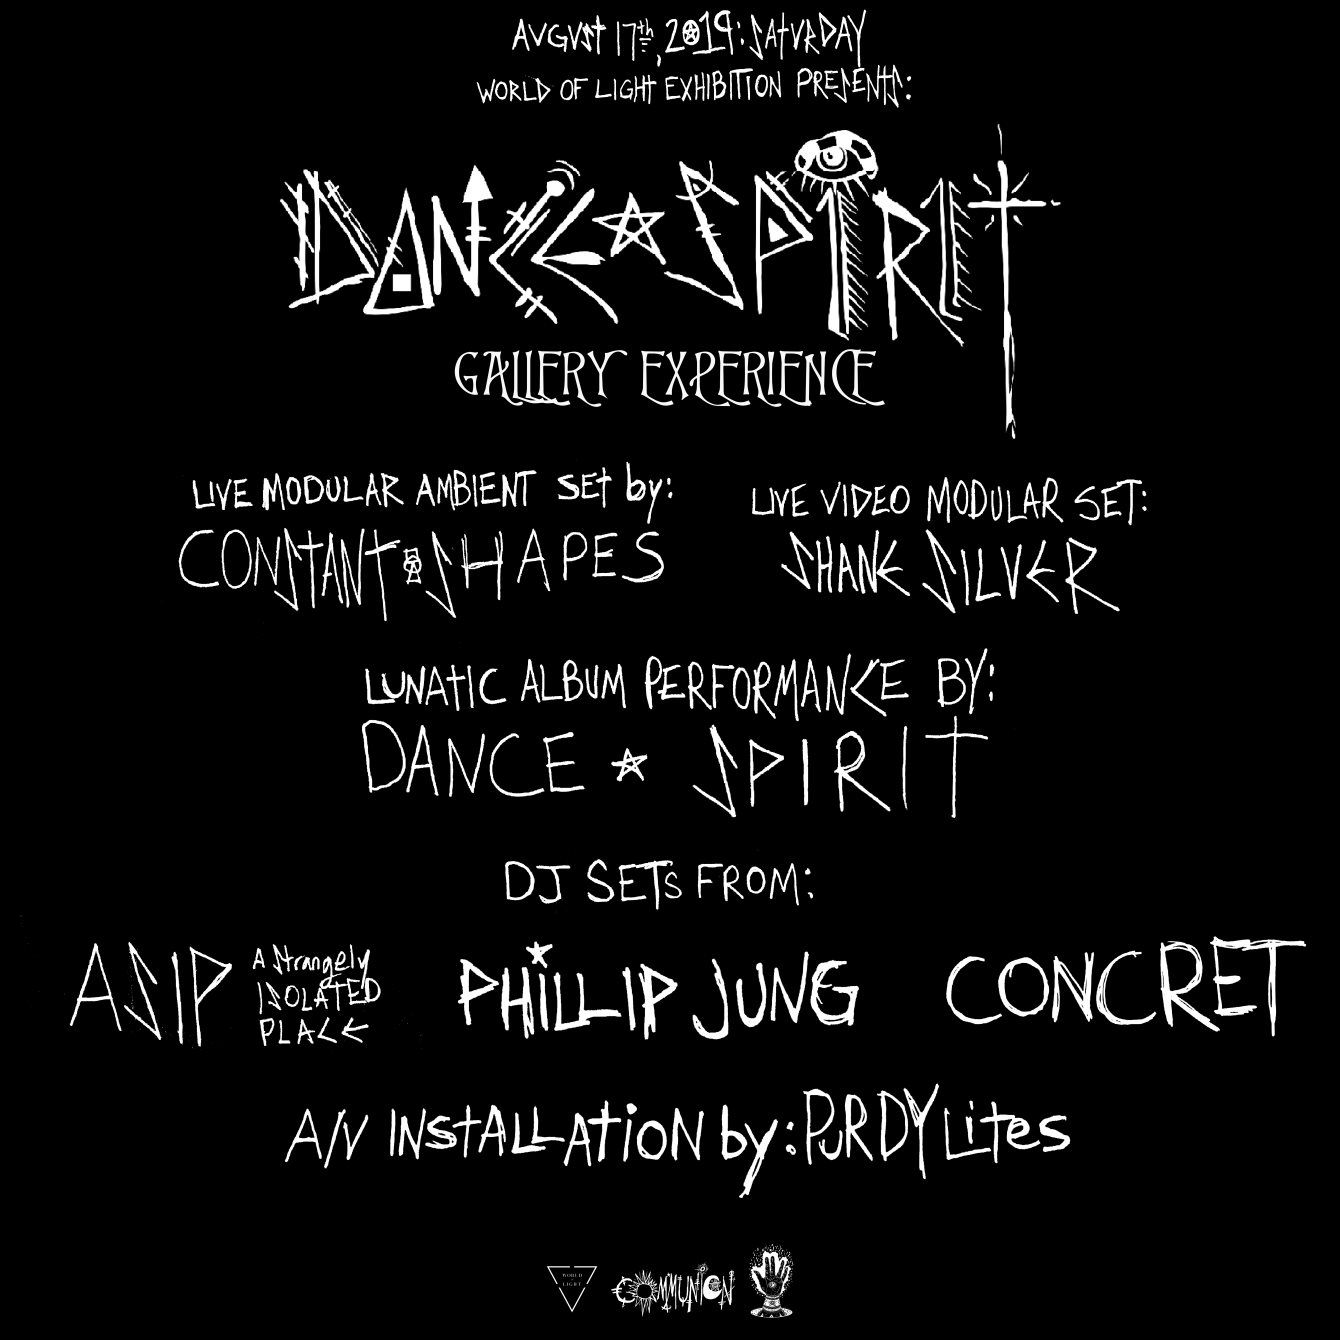 Dance Spirit Gallery Experience, Forever Jung (Formerly of Mandy), Concret - Flyer front